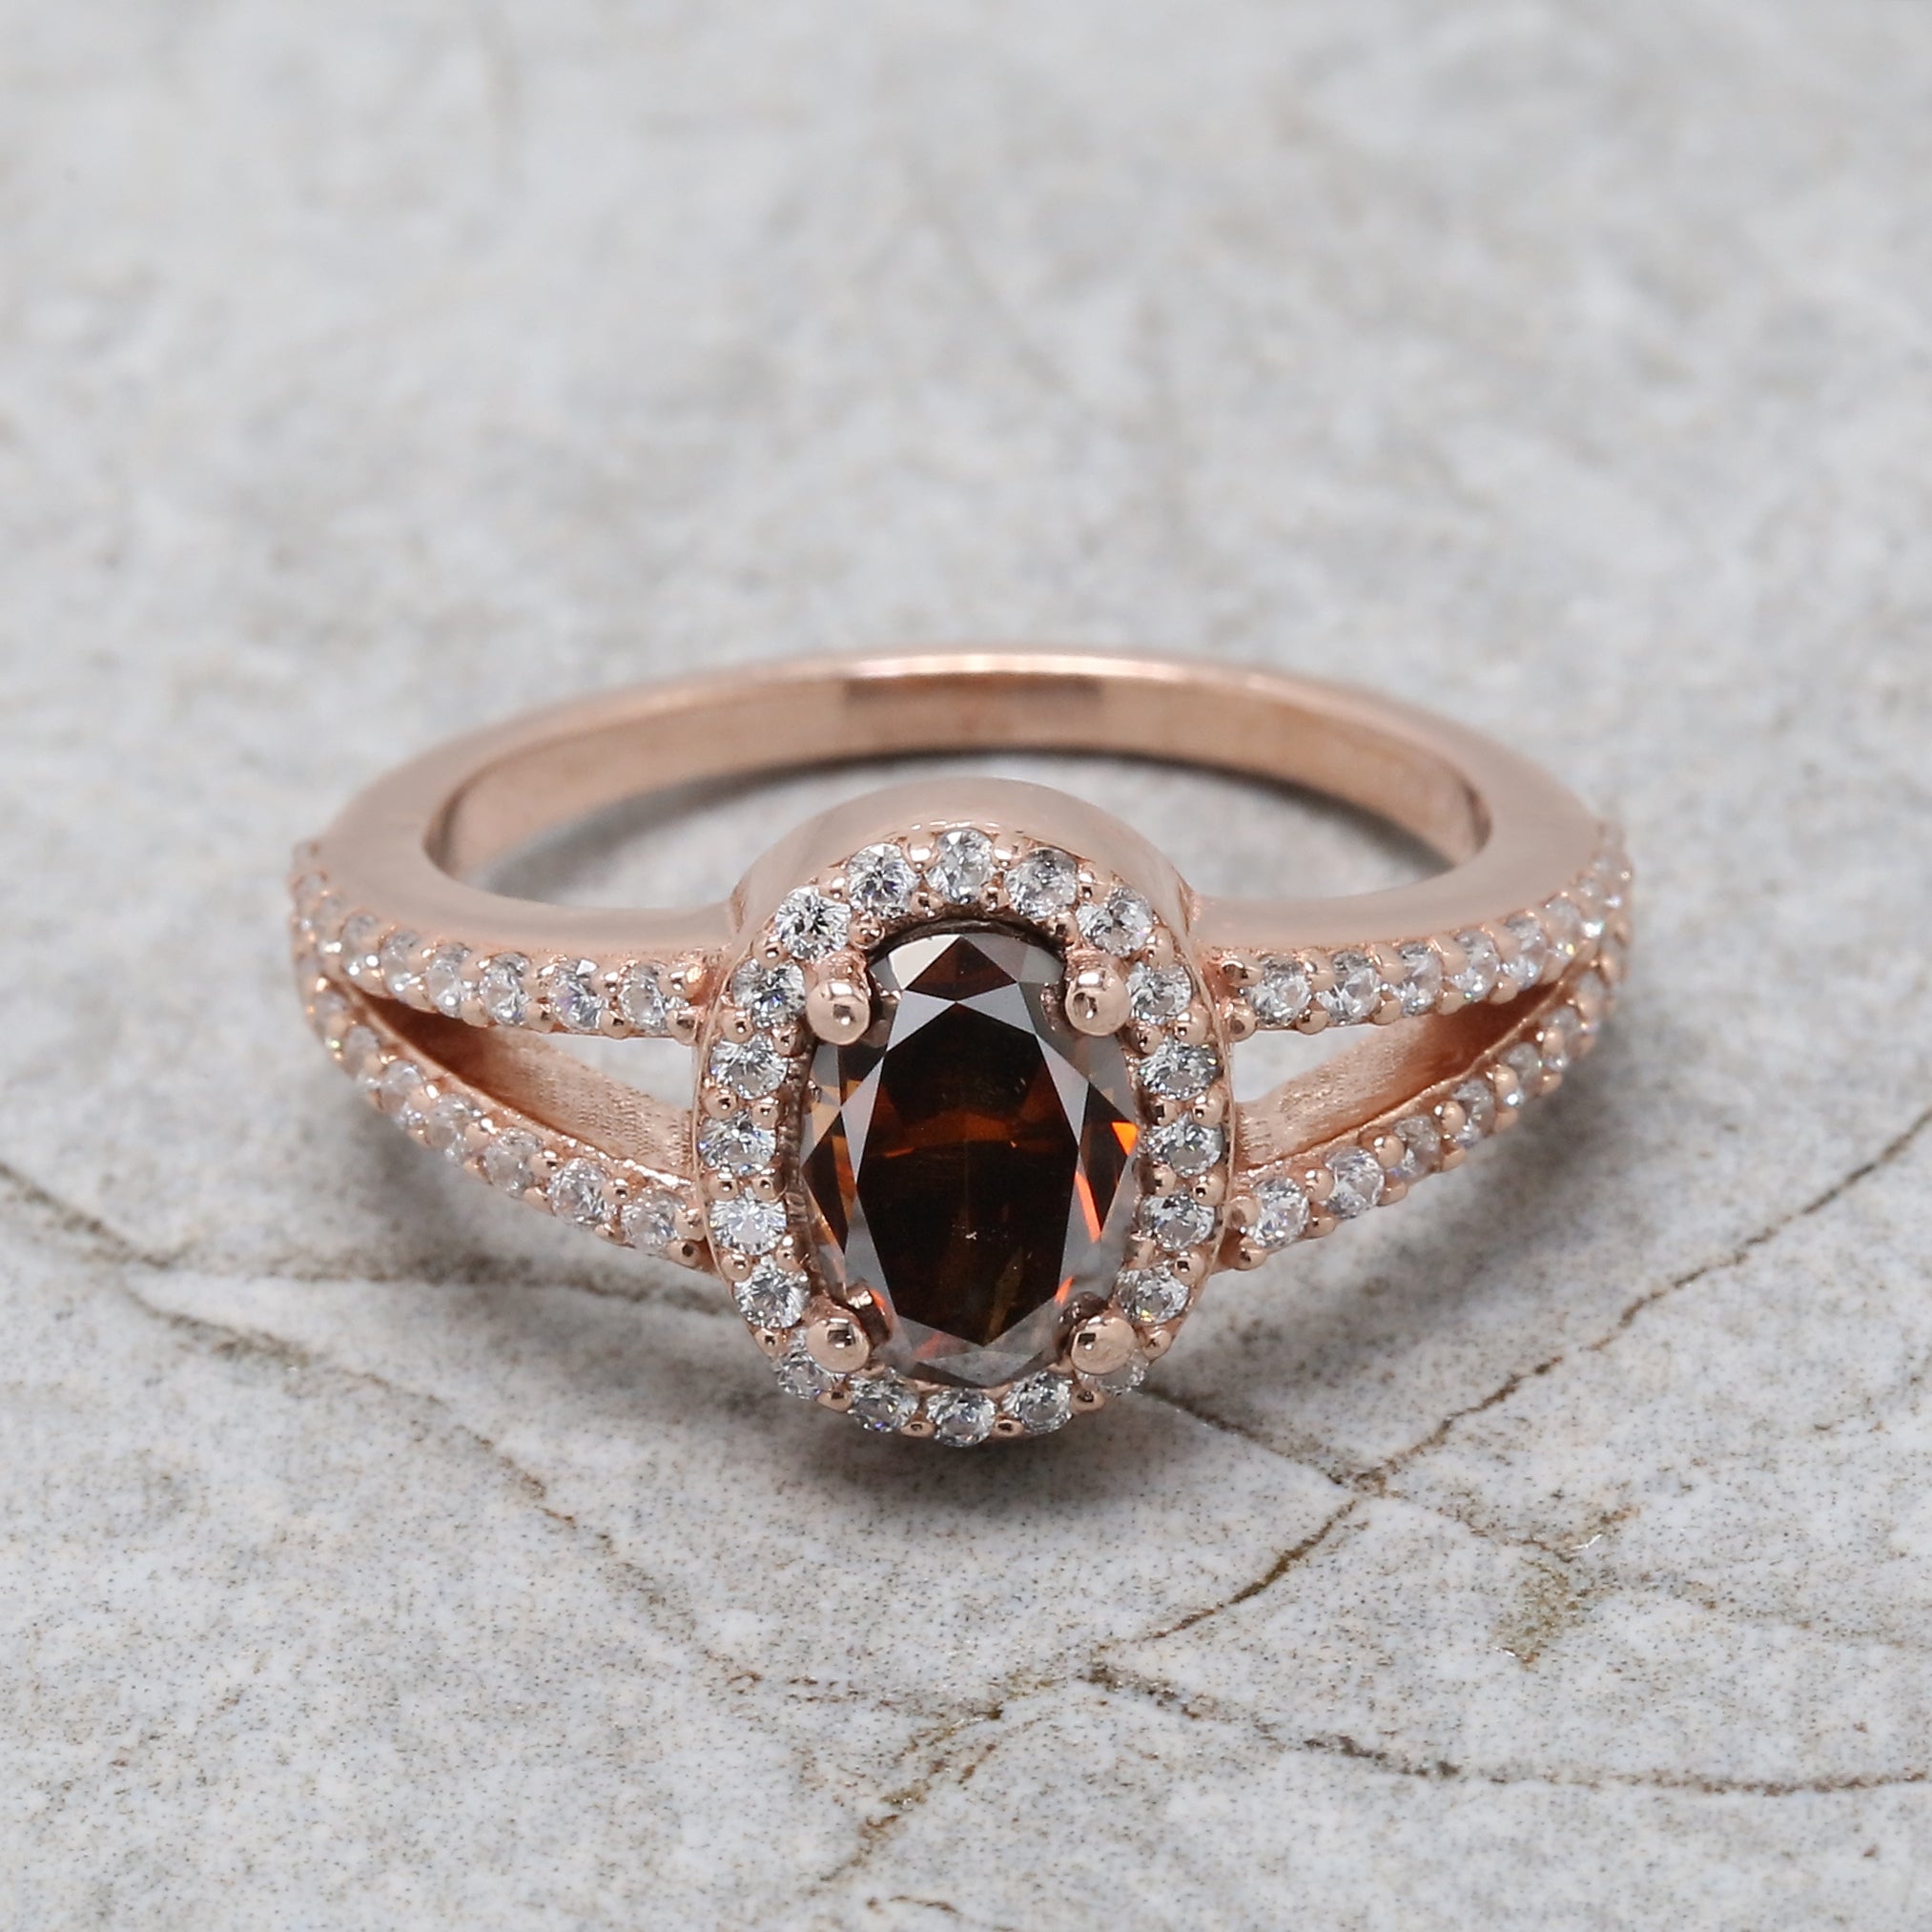 Oval Cut Brown Color Diamond Ring 1.37 Ct 7.65 MM Oval Shape Diamond Ring 14K Solid Rose Gold Silver Engagement Ring Gift For Her QL1773